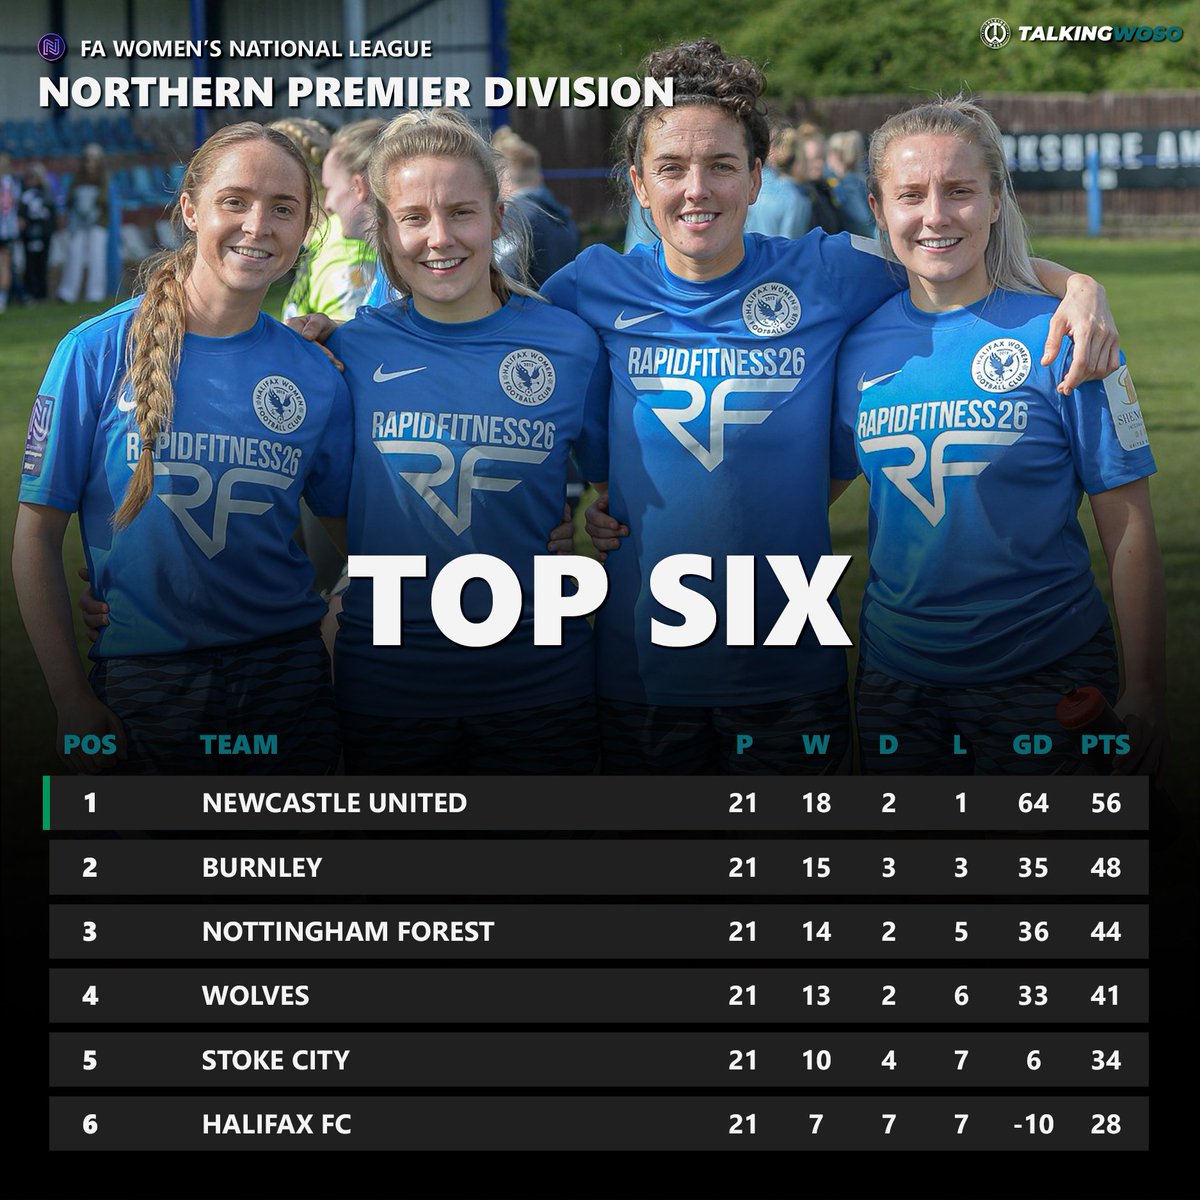 Eagles soar into the top half 🦅

@HalifaxFCWomen recorded back-to-back FAWNL Northern Premier Division wins for the first time since February with a 2-1 victory over @WolvesWomen to move into the top half of the table. 

📸 @rayspencer182